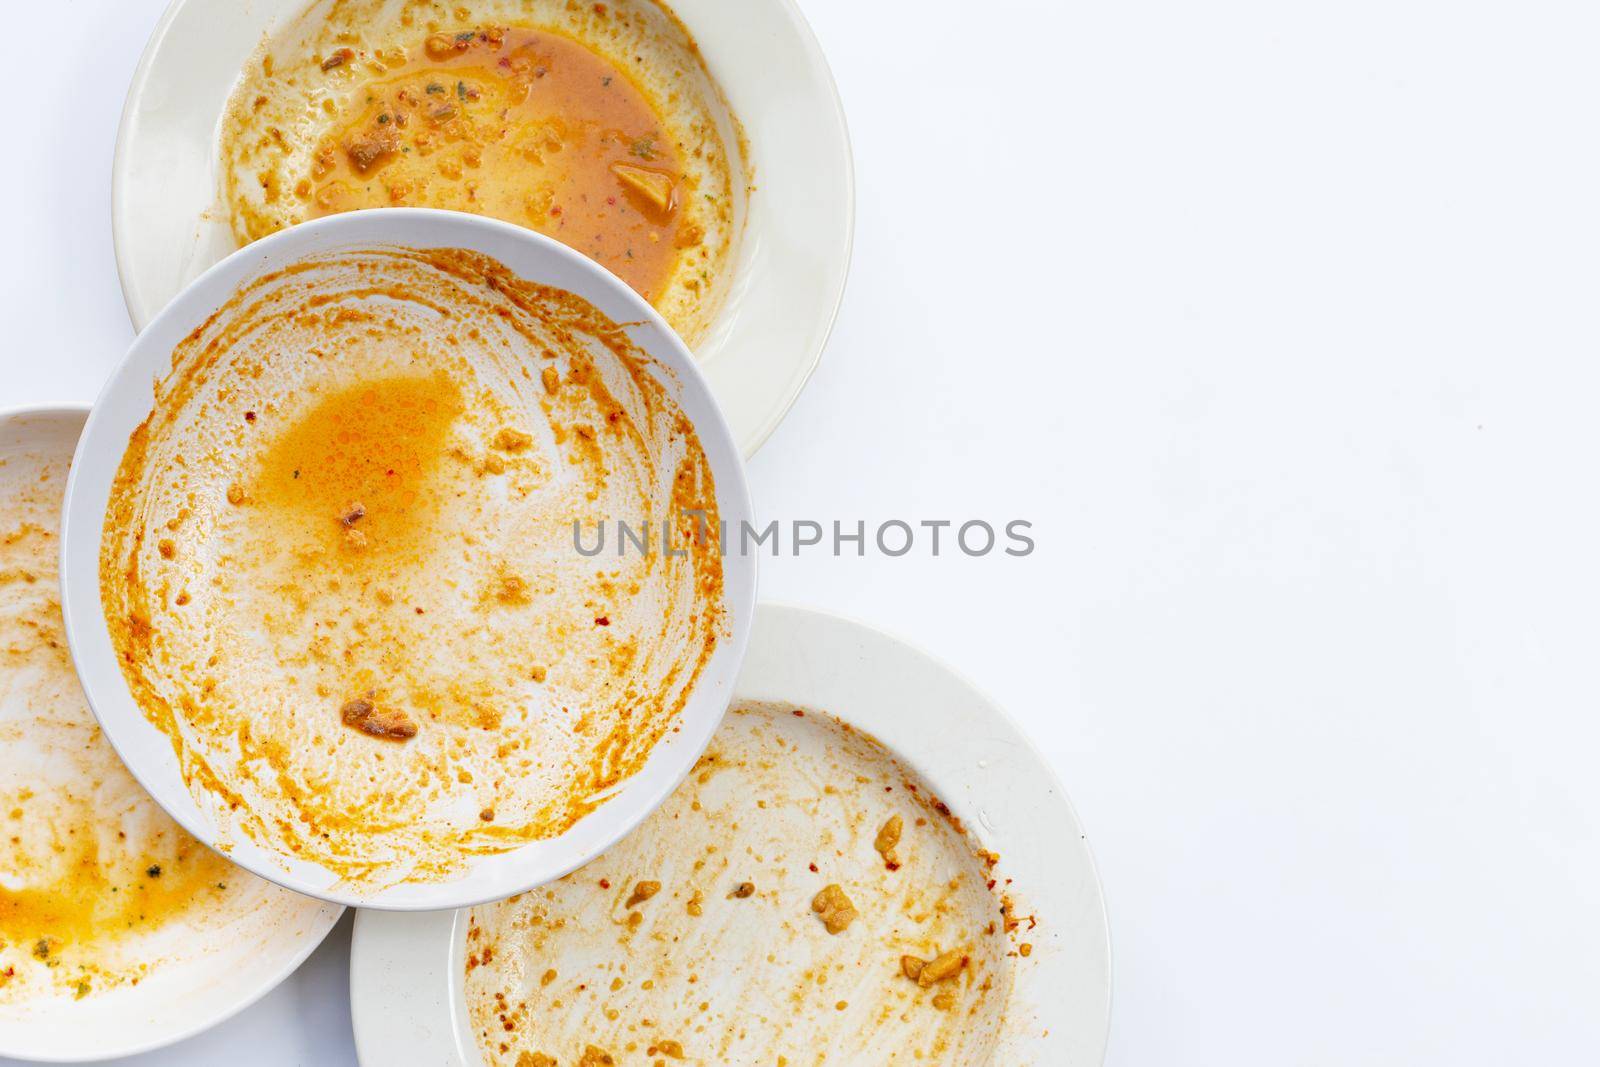 Dirty dishes on white background. Top view by Bowonpat